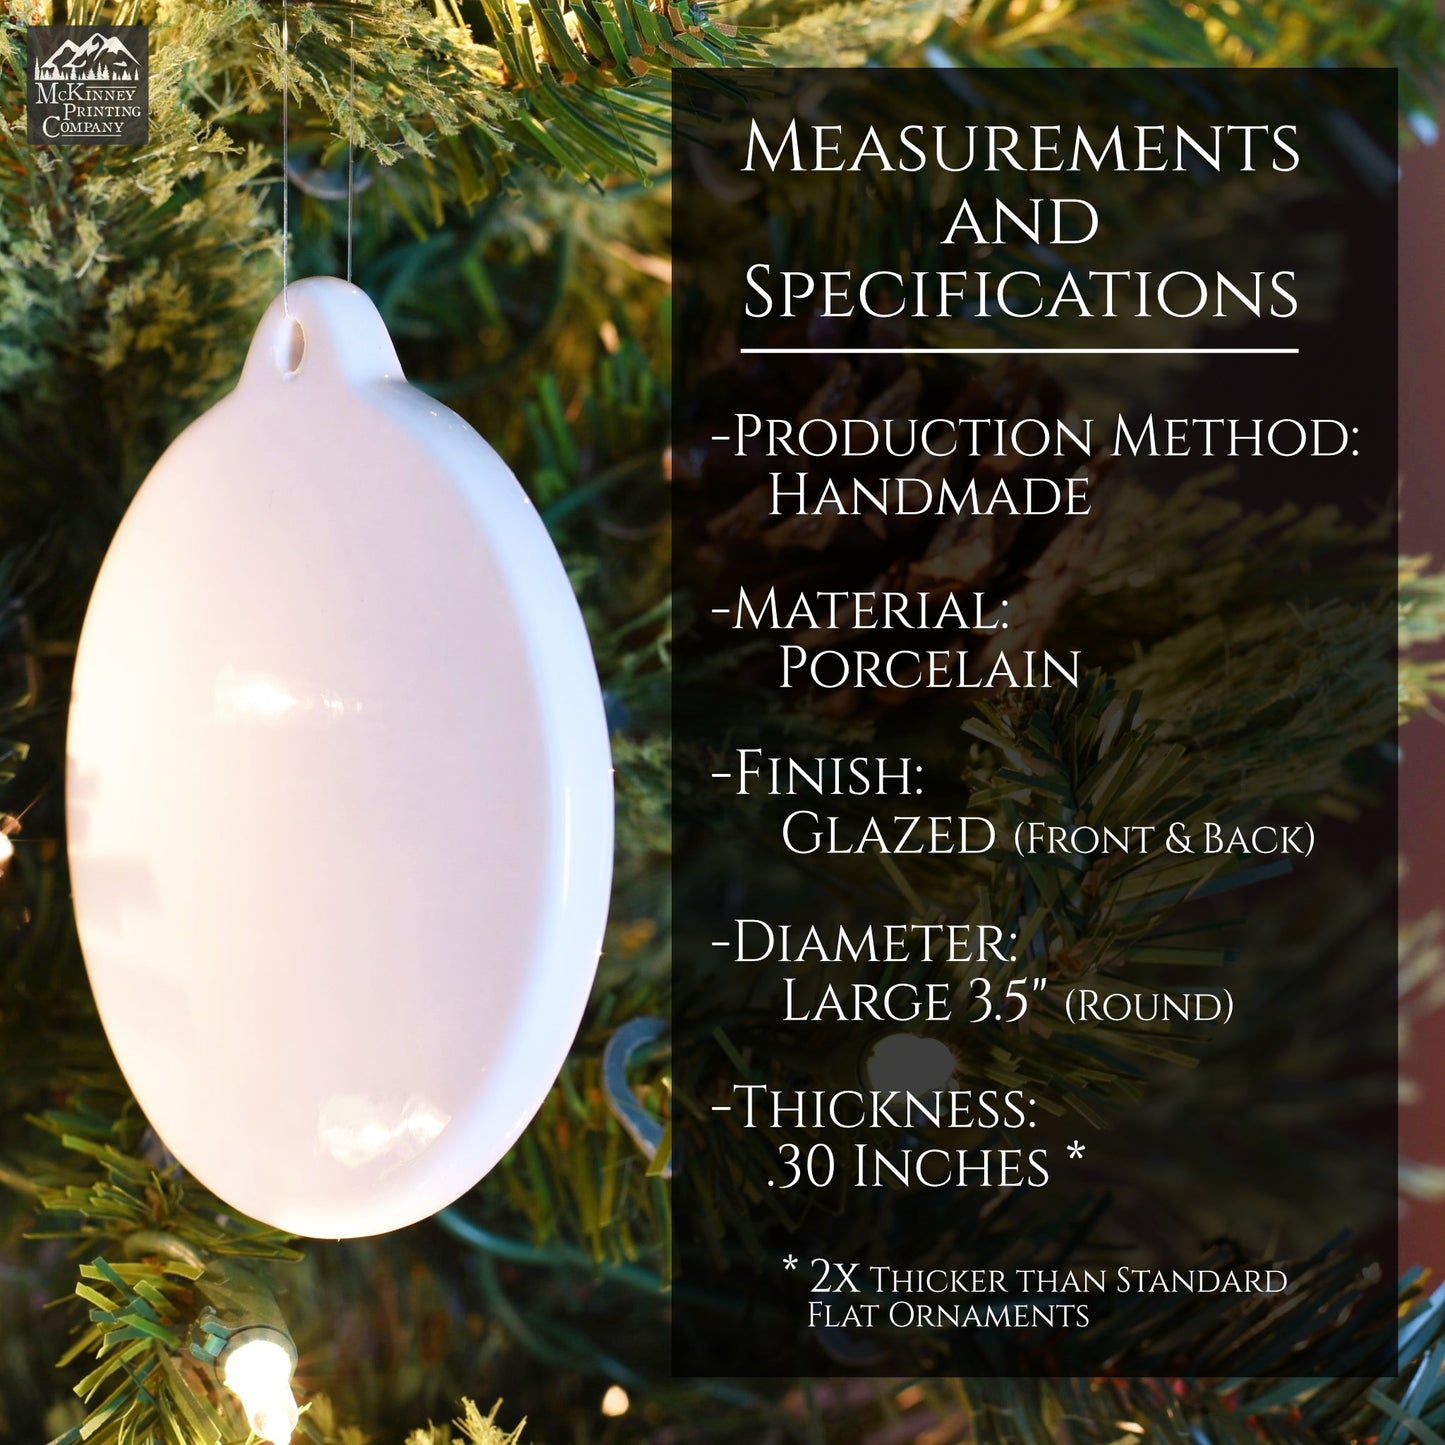 Handmade, porcelain Christmas ornaments.  Large, round, 3.5 inch diameter.  Two times thicker than standard flat ornaments.  Includes your choice or ribbon color, a decorative hook and an optional personalized message on the back.